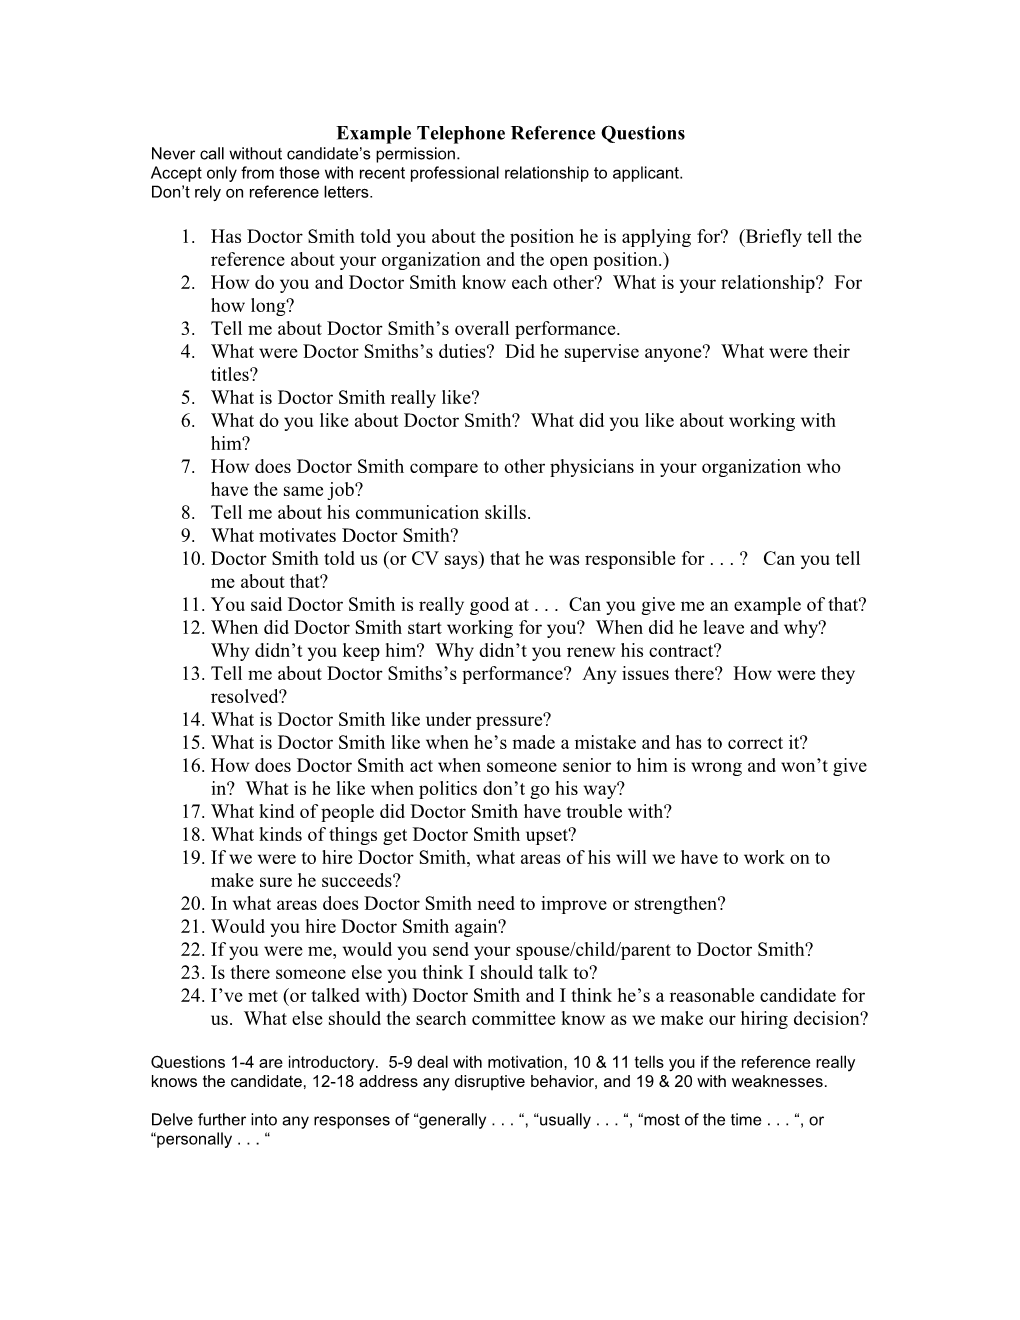 Example Telephone Reference Questions